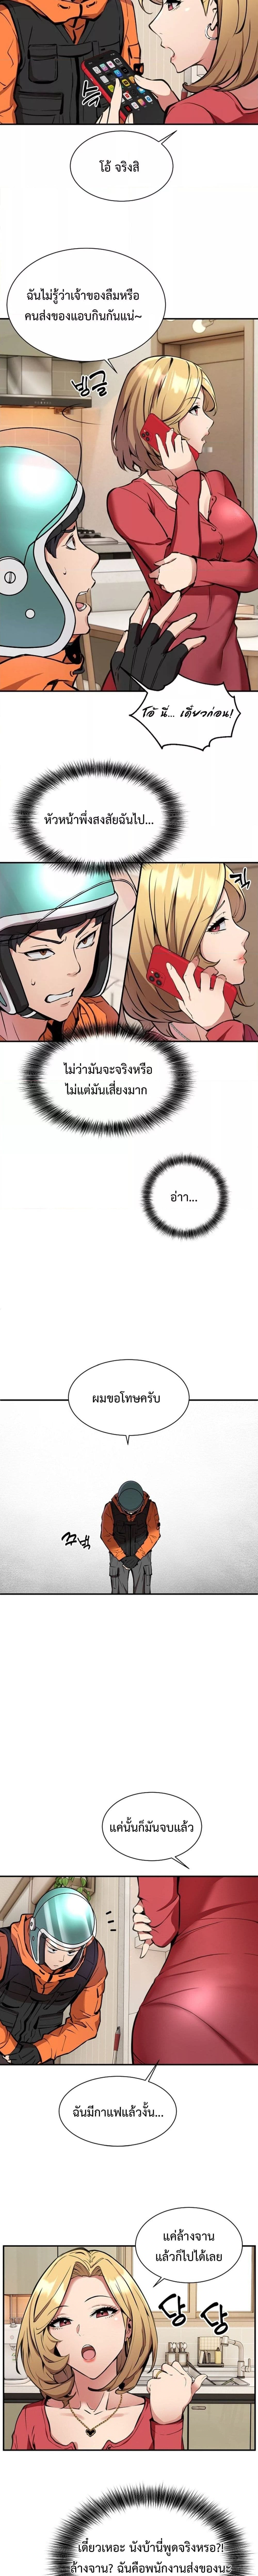 Driver in the New City ตอนที่ 1 ภาพ 19